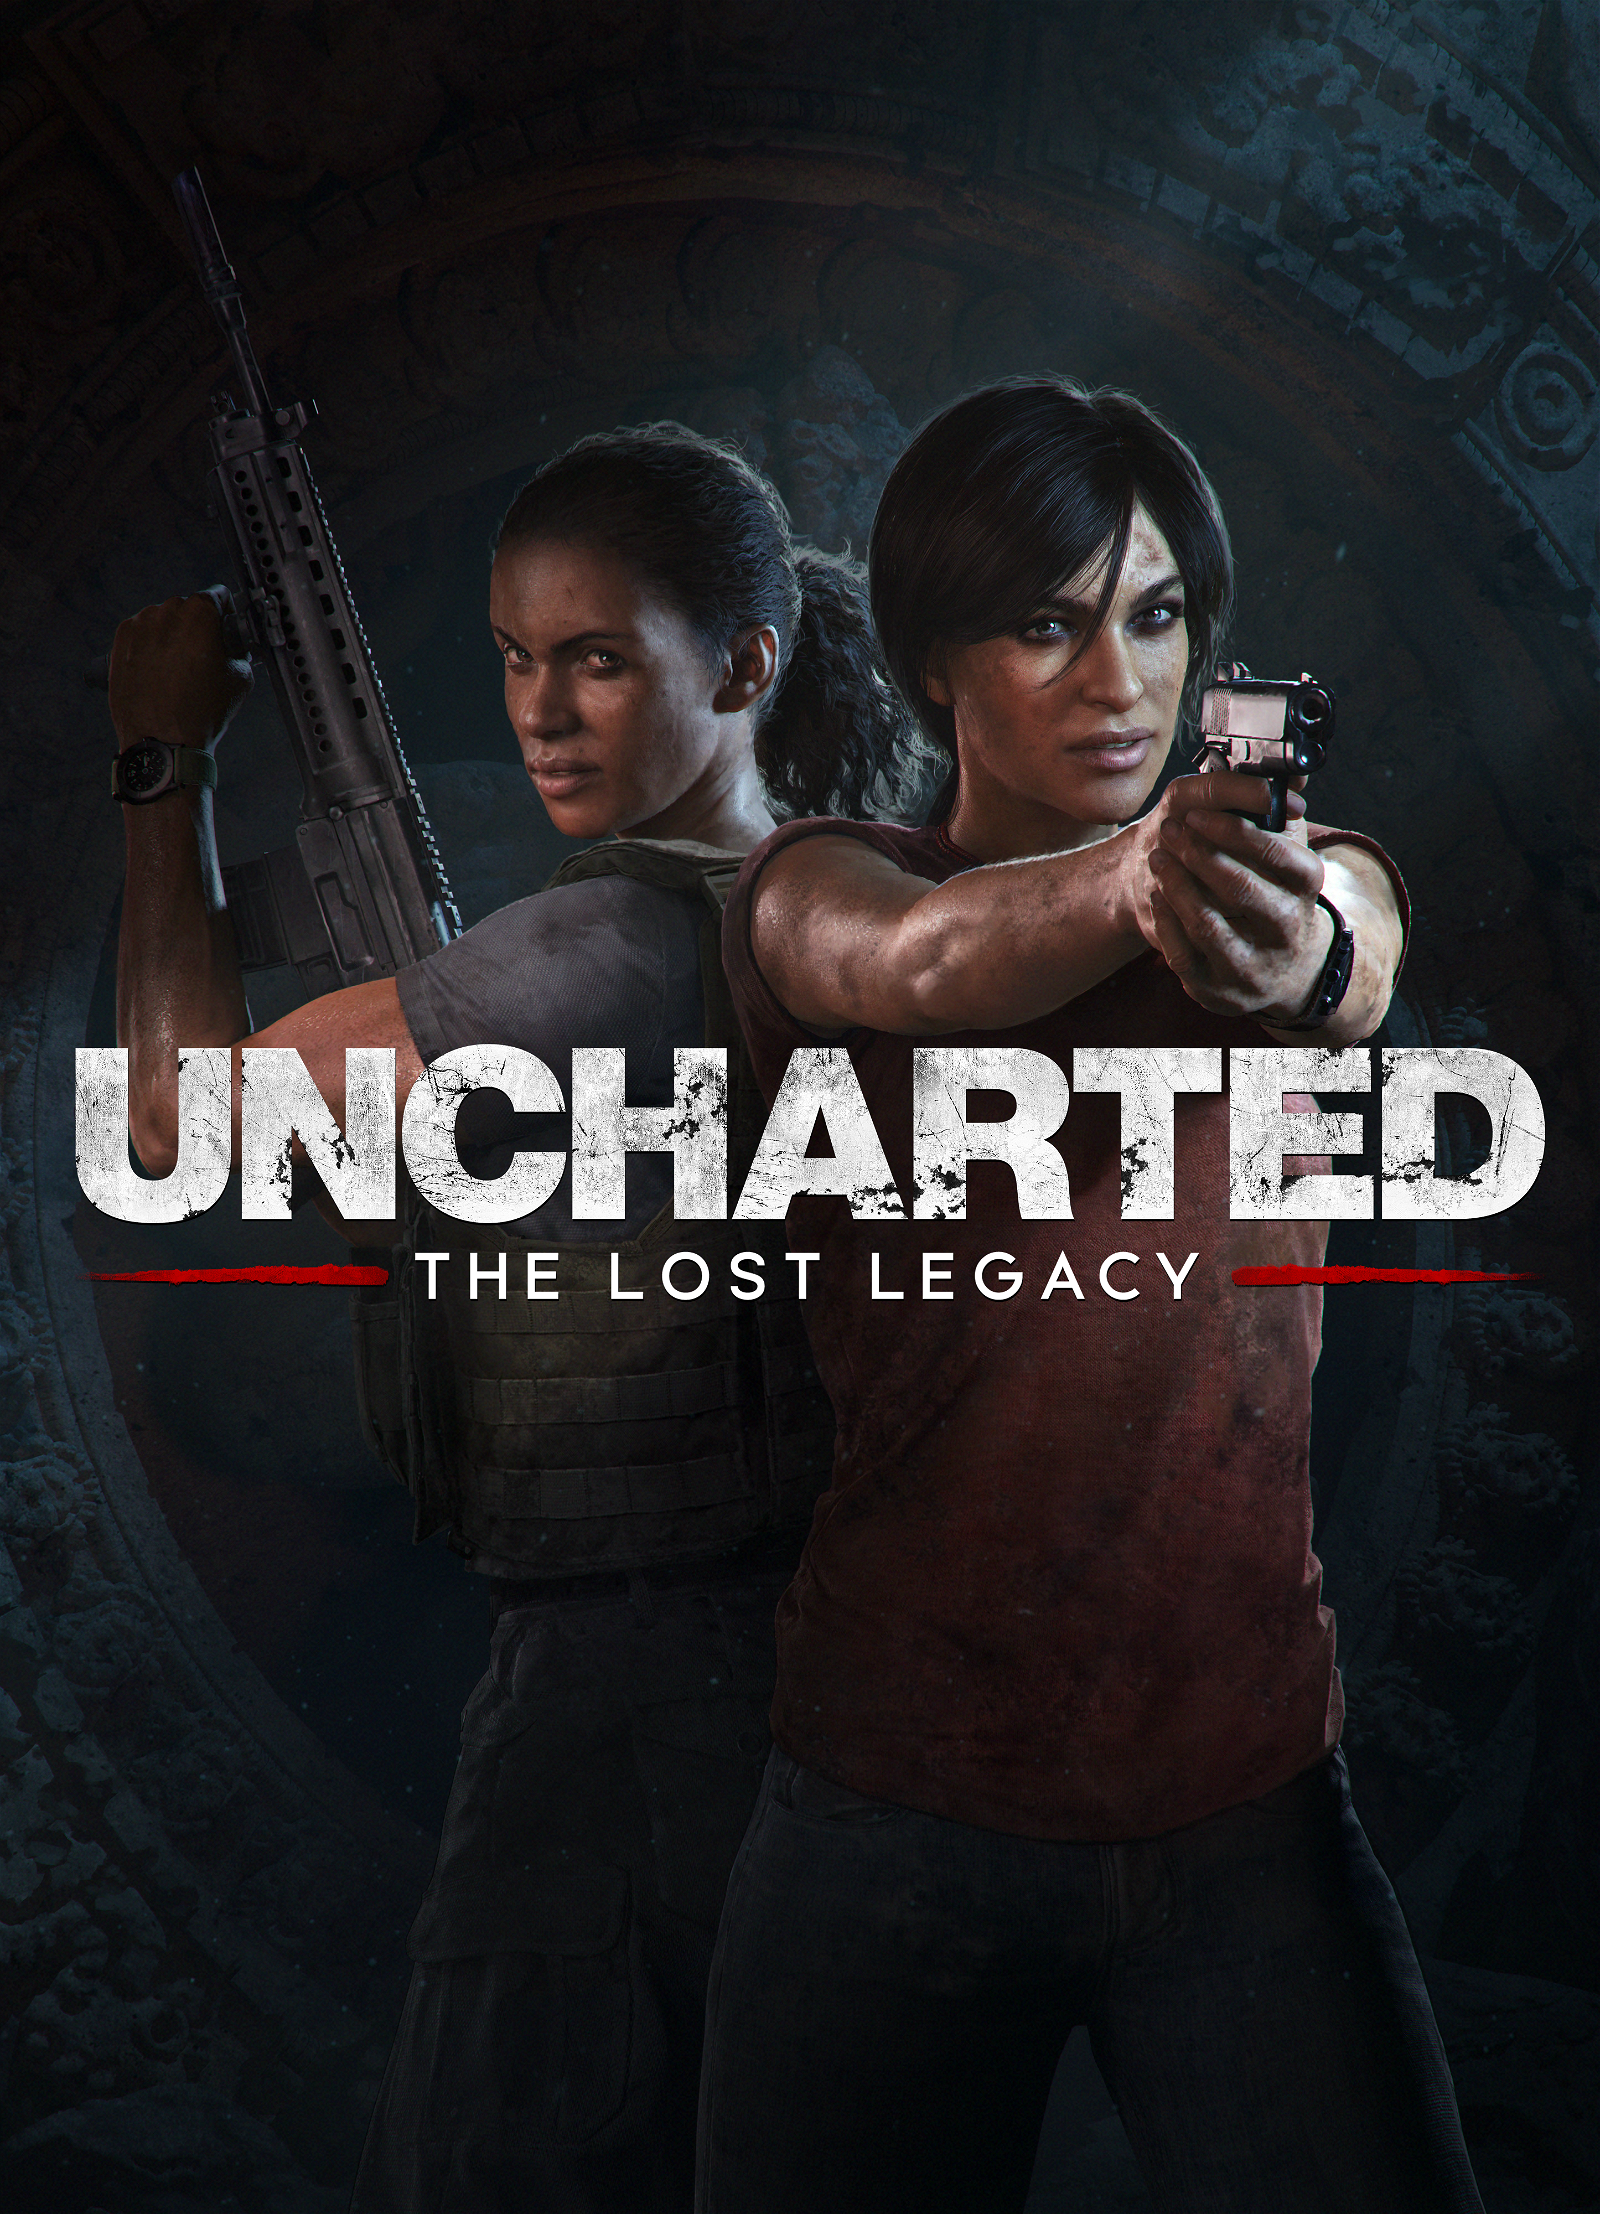 Image of Uncharted: The Lost Legacy